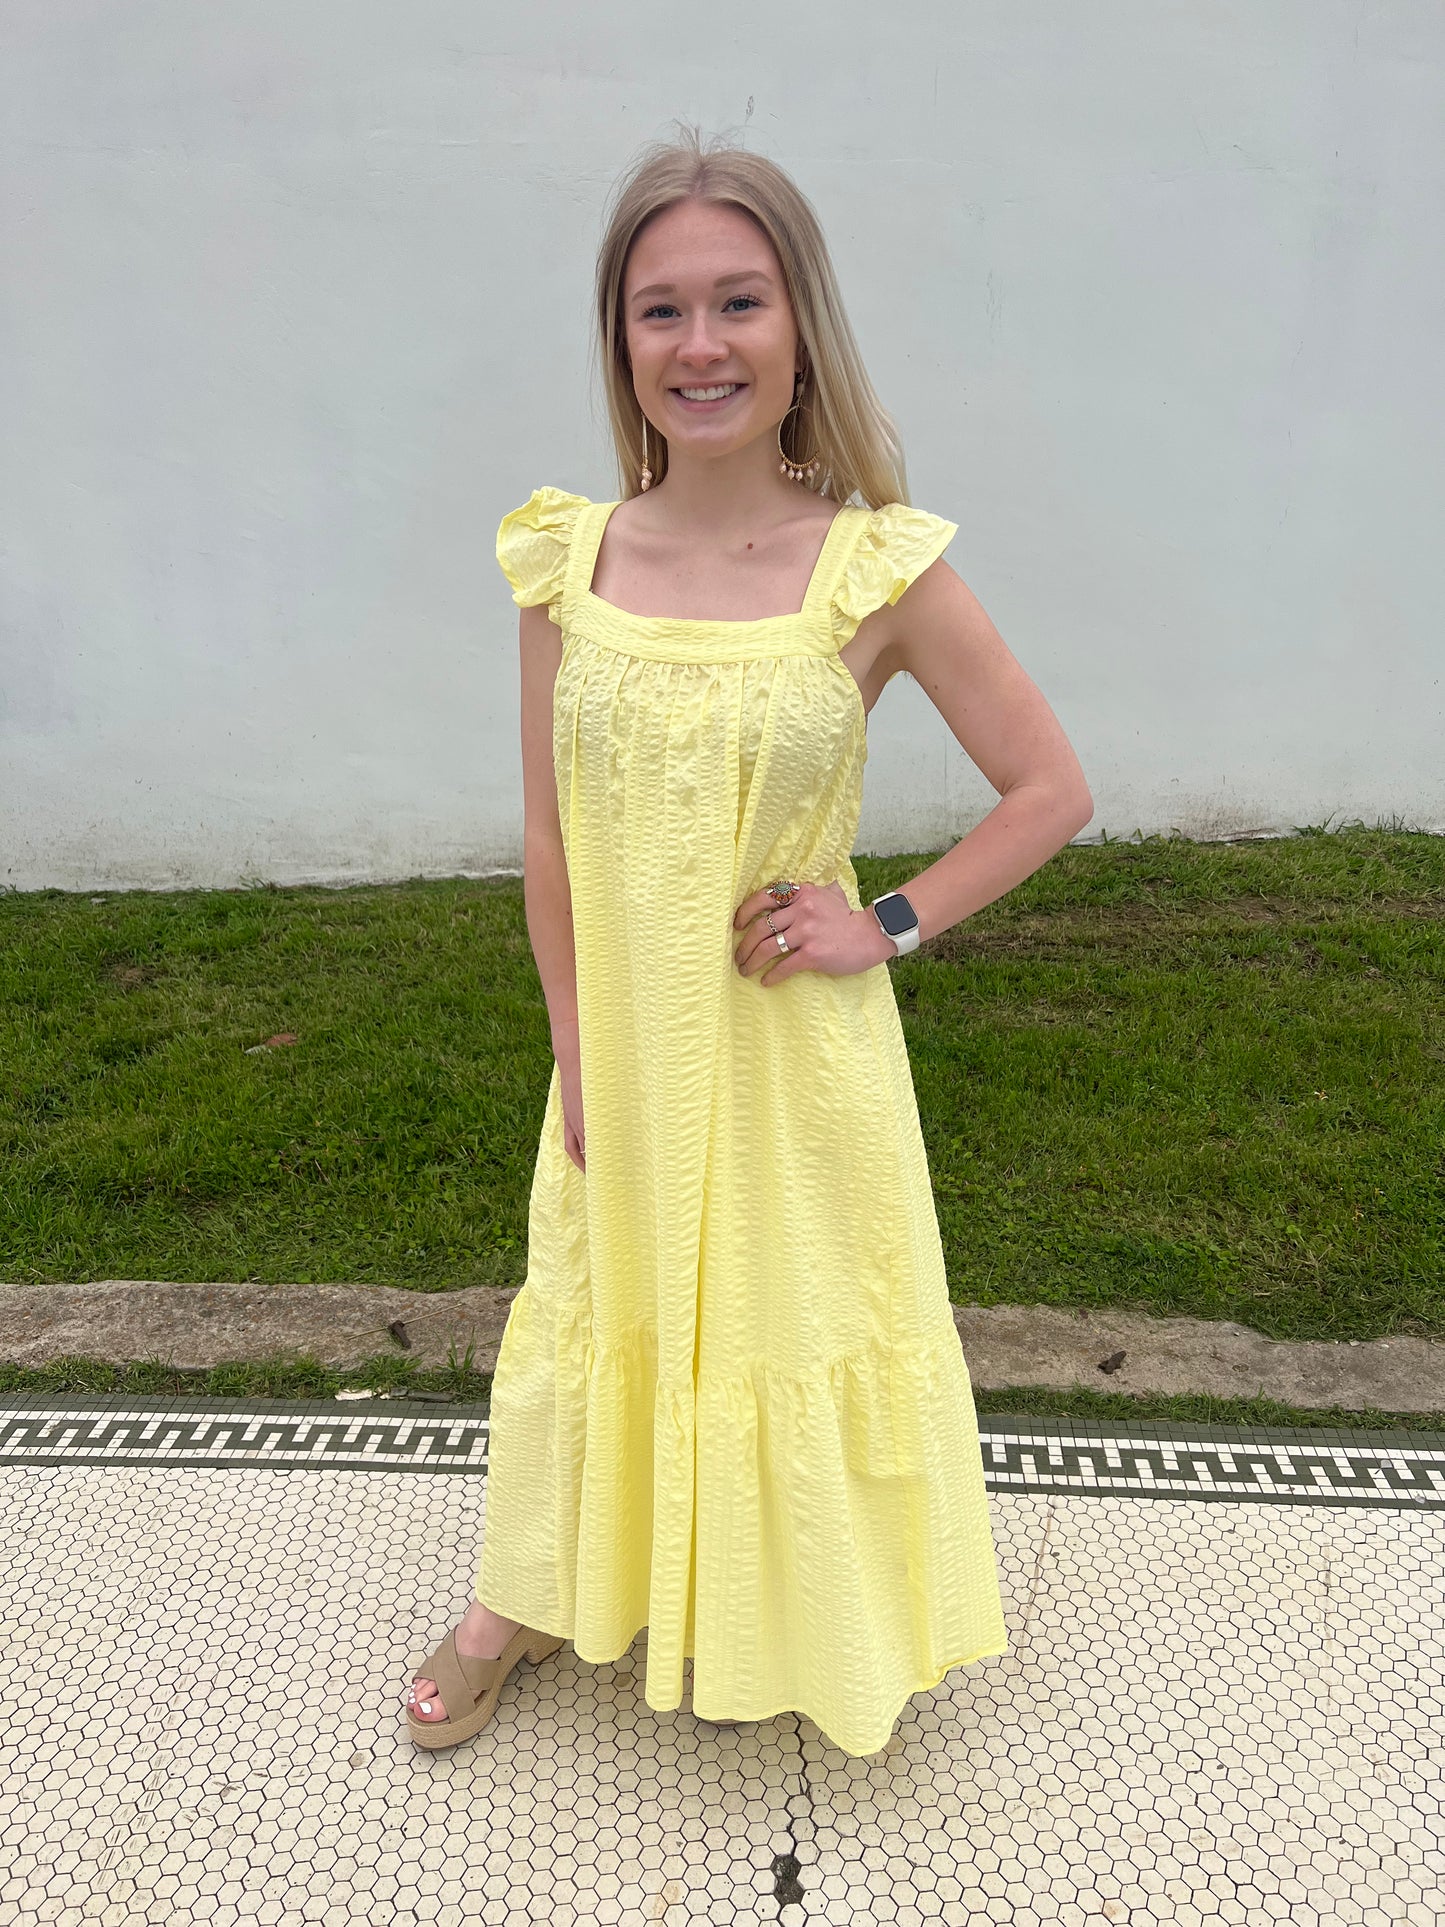 Crinkled Buttercup Dress in Pastel Yellow